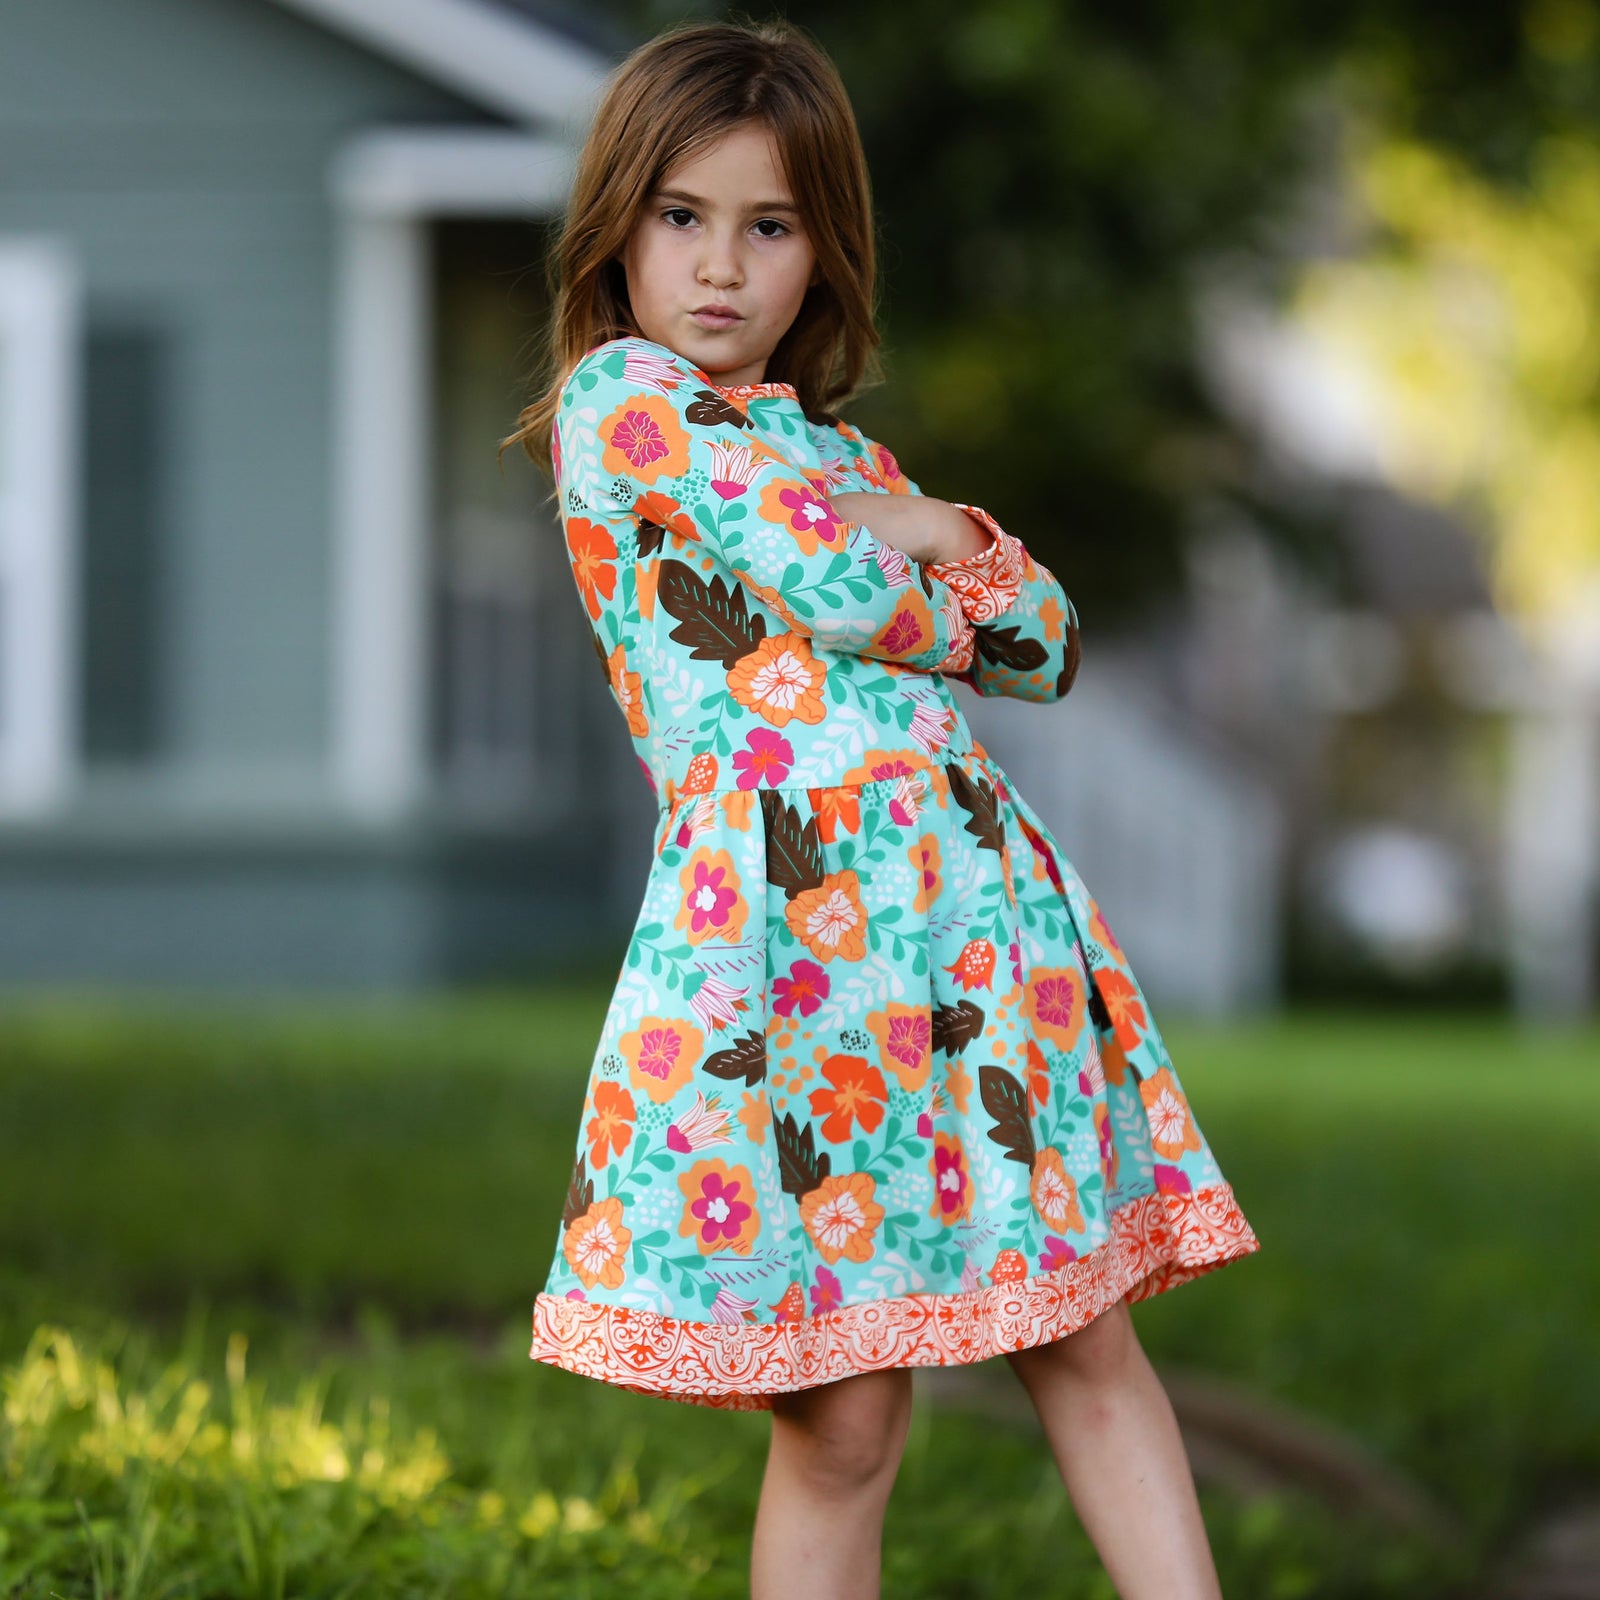 Autumn Leaves Floral Cotton Long Sleeve Little & Big Girls Dress for Sizes 2/3T-11/12 by AnnLoren